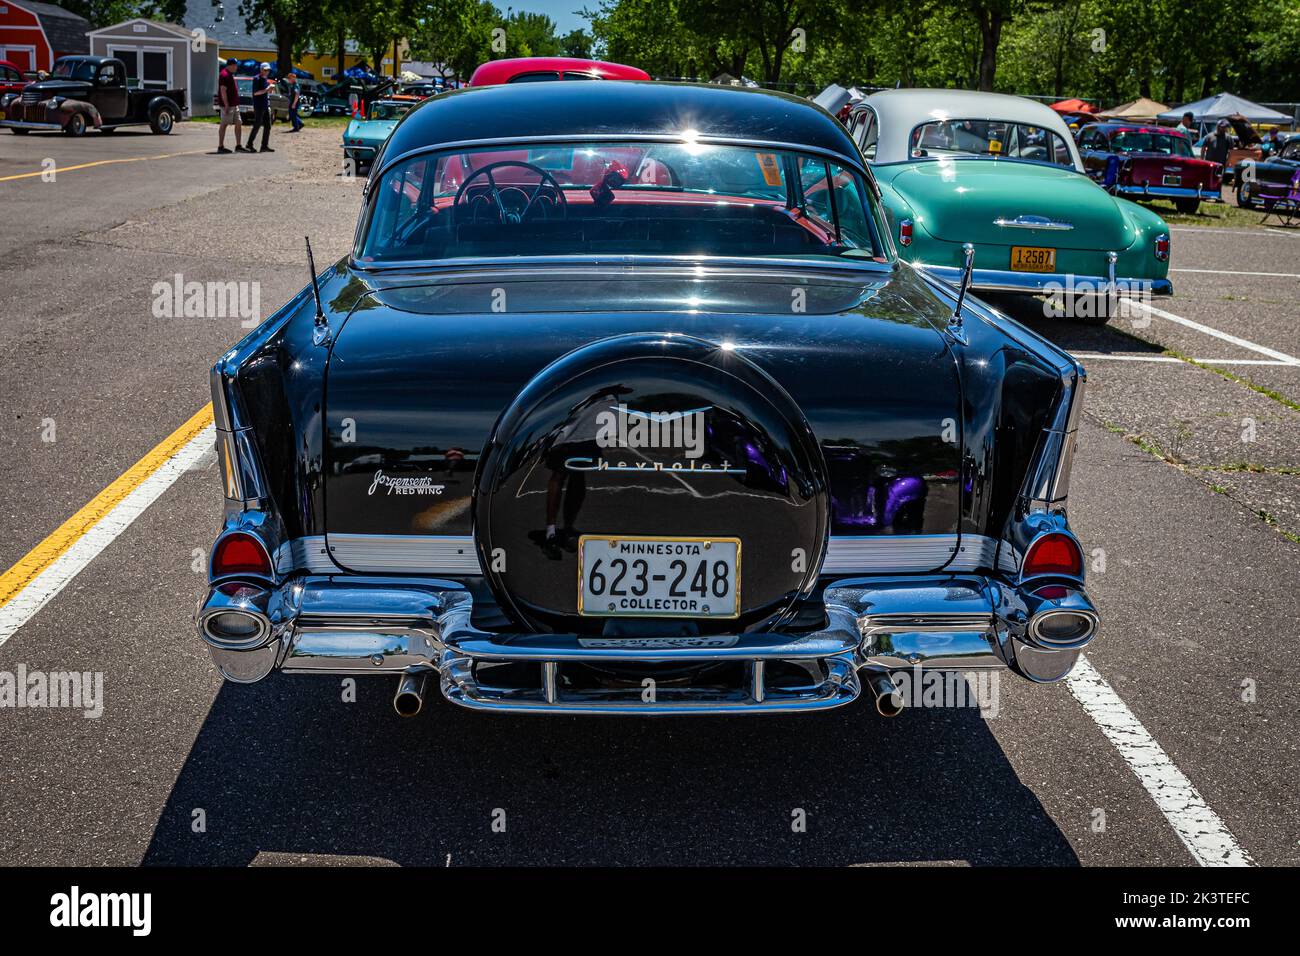 Falcon Heights, MN - June 18, 2022: High perspective rear view of a 1957 Chevrolet BelAir 2 Door Hardtop at a local car show. Stock Photo